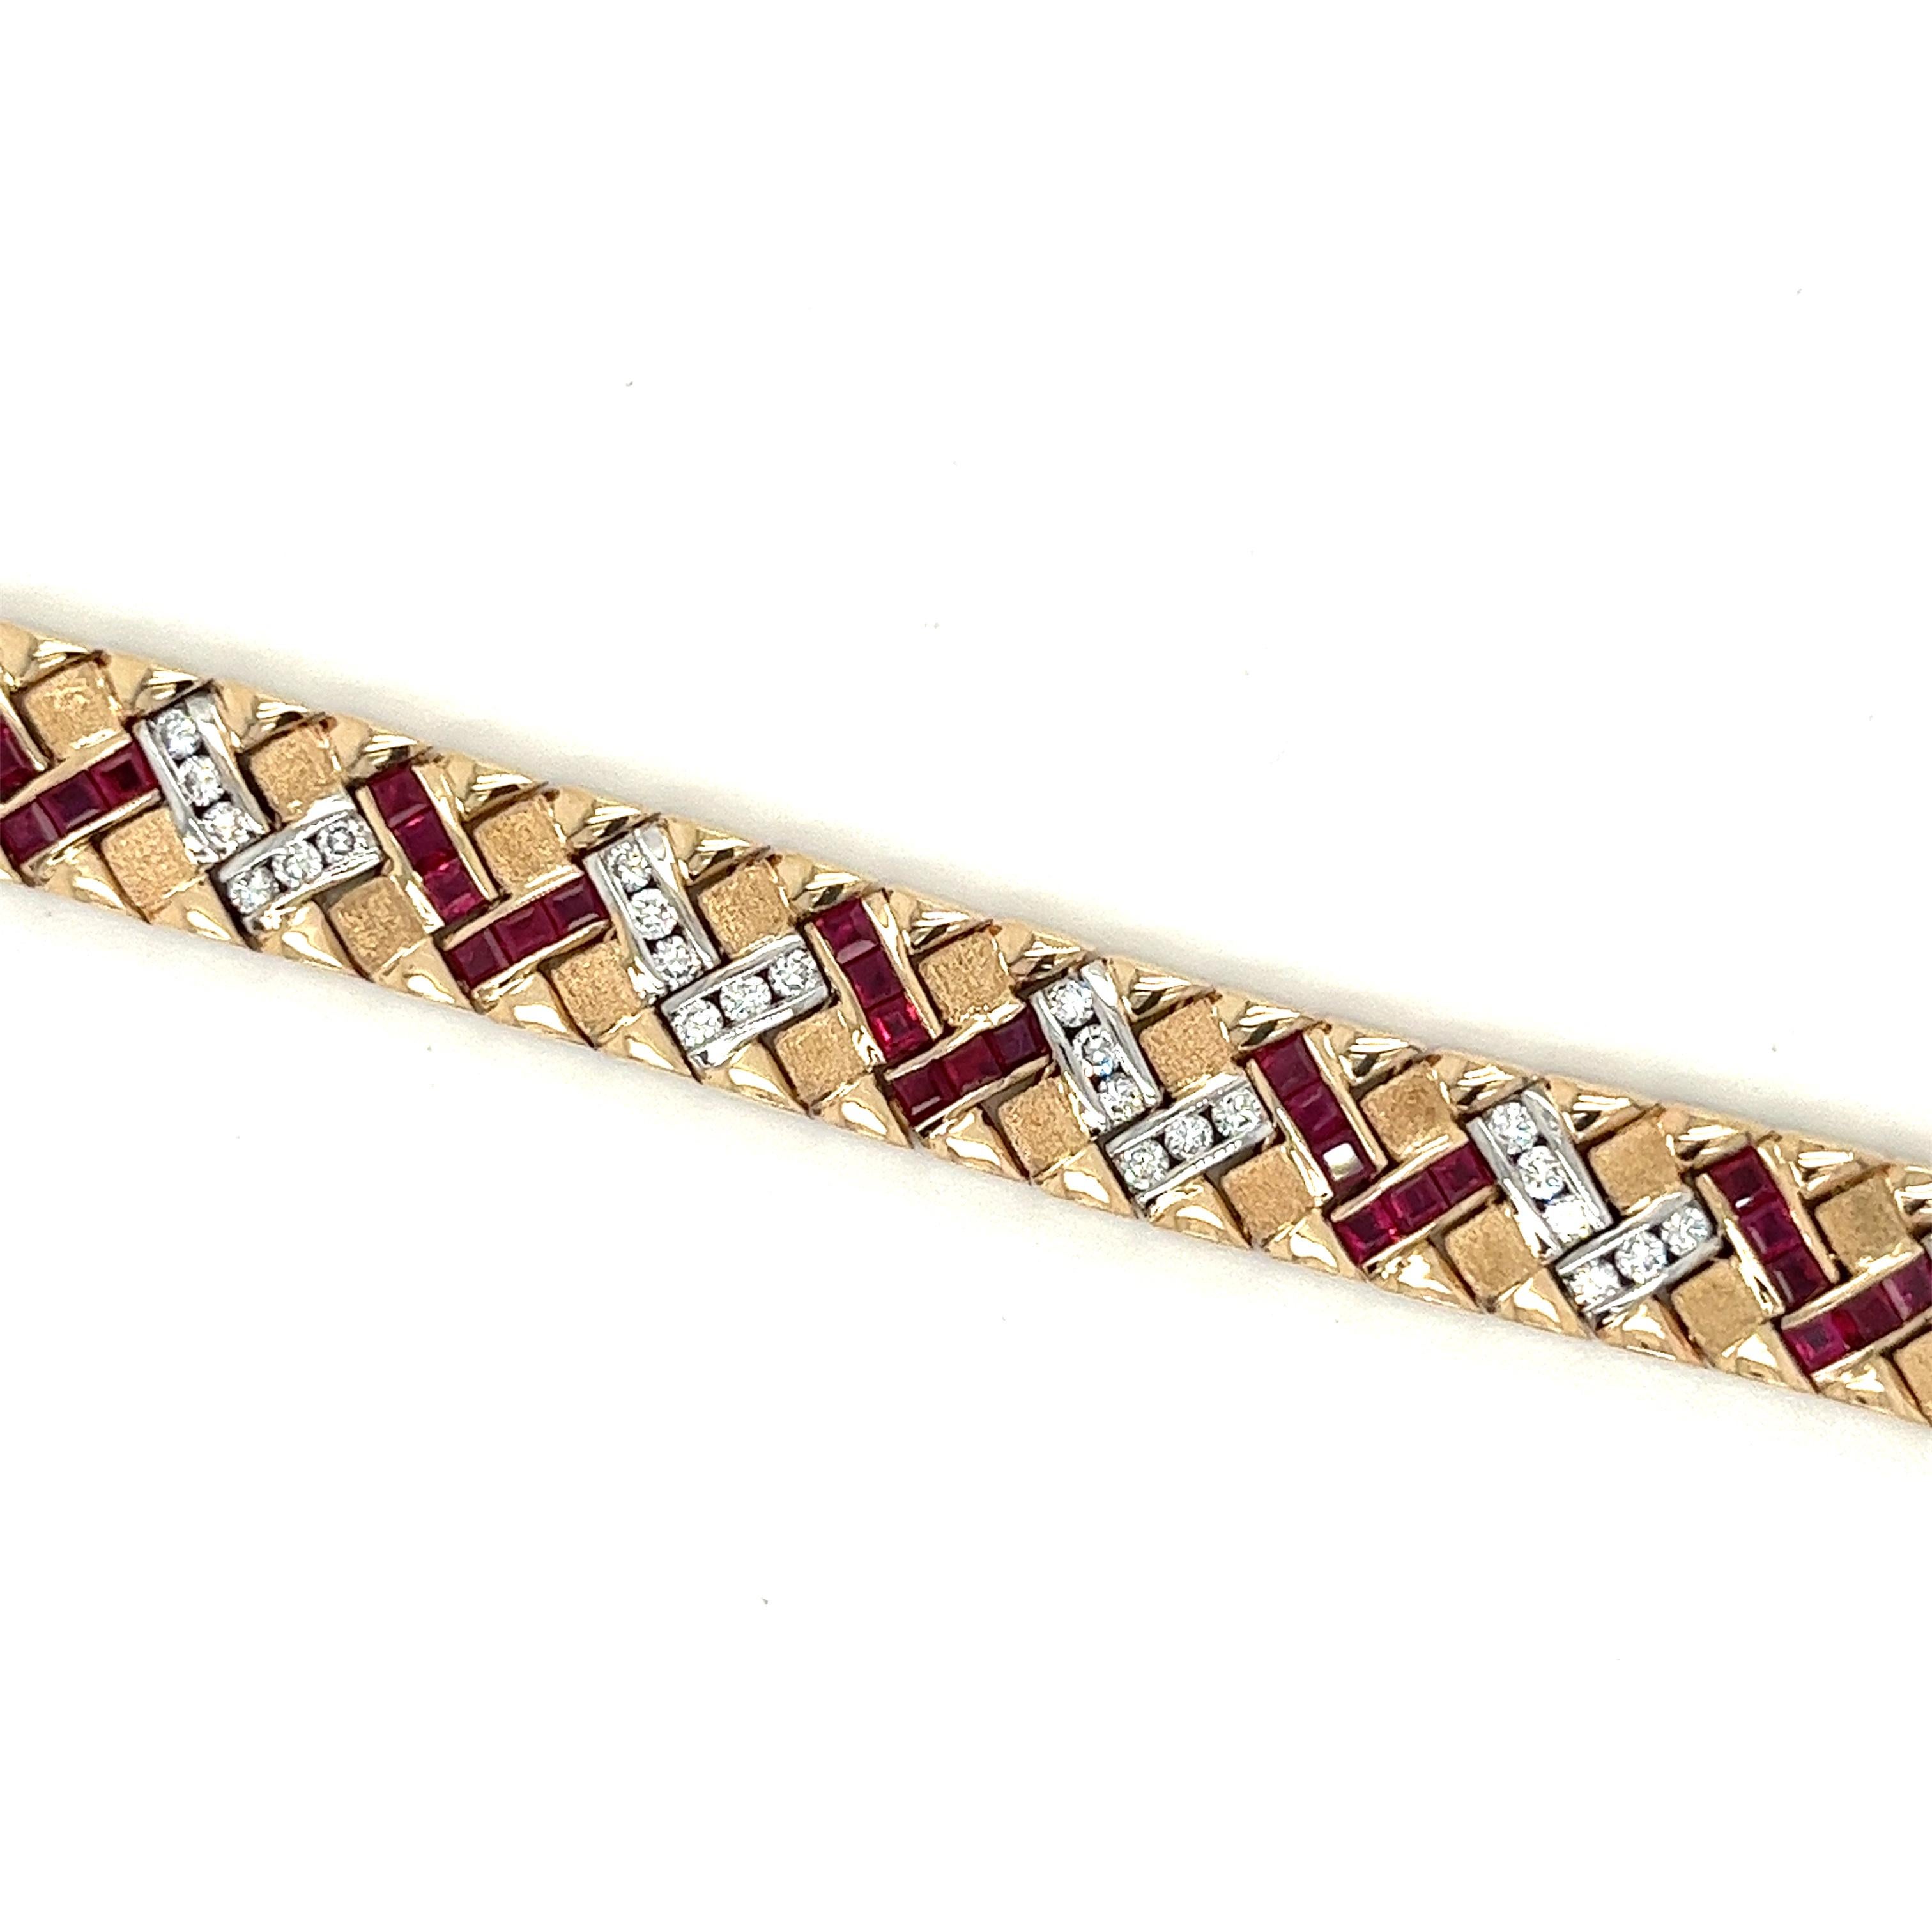 Vintage Art Deco Inspired Ruby and Diamond Matte Gold Finish Bracelet in 14k In Excellent Condition For Sale In Miami, FL